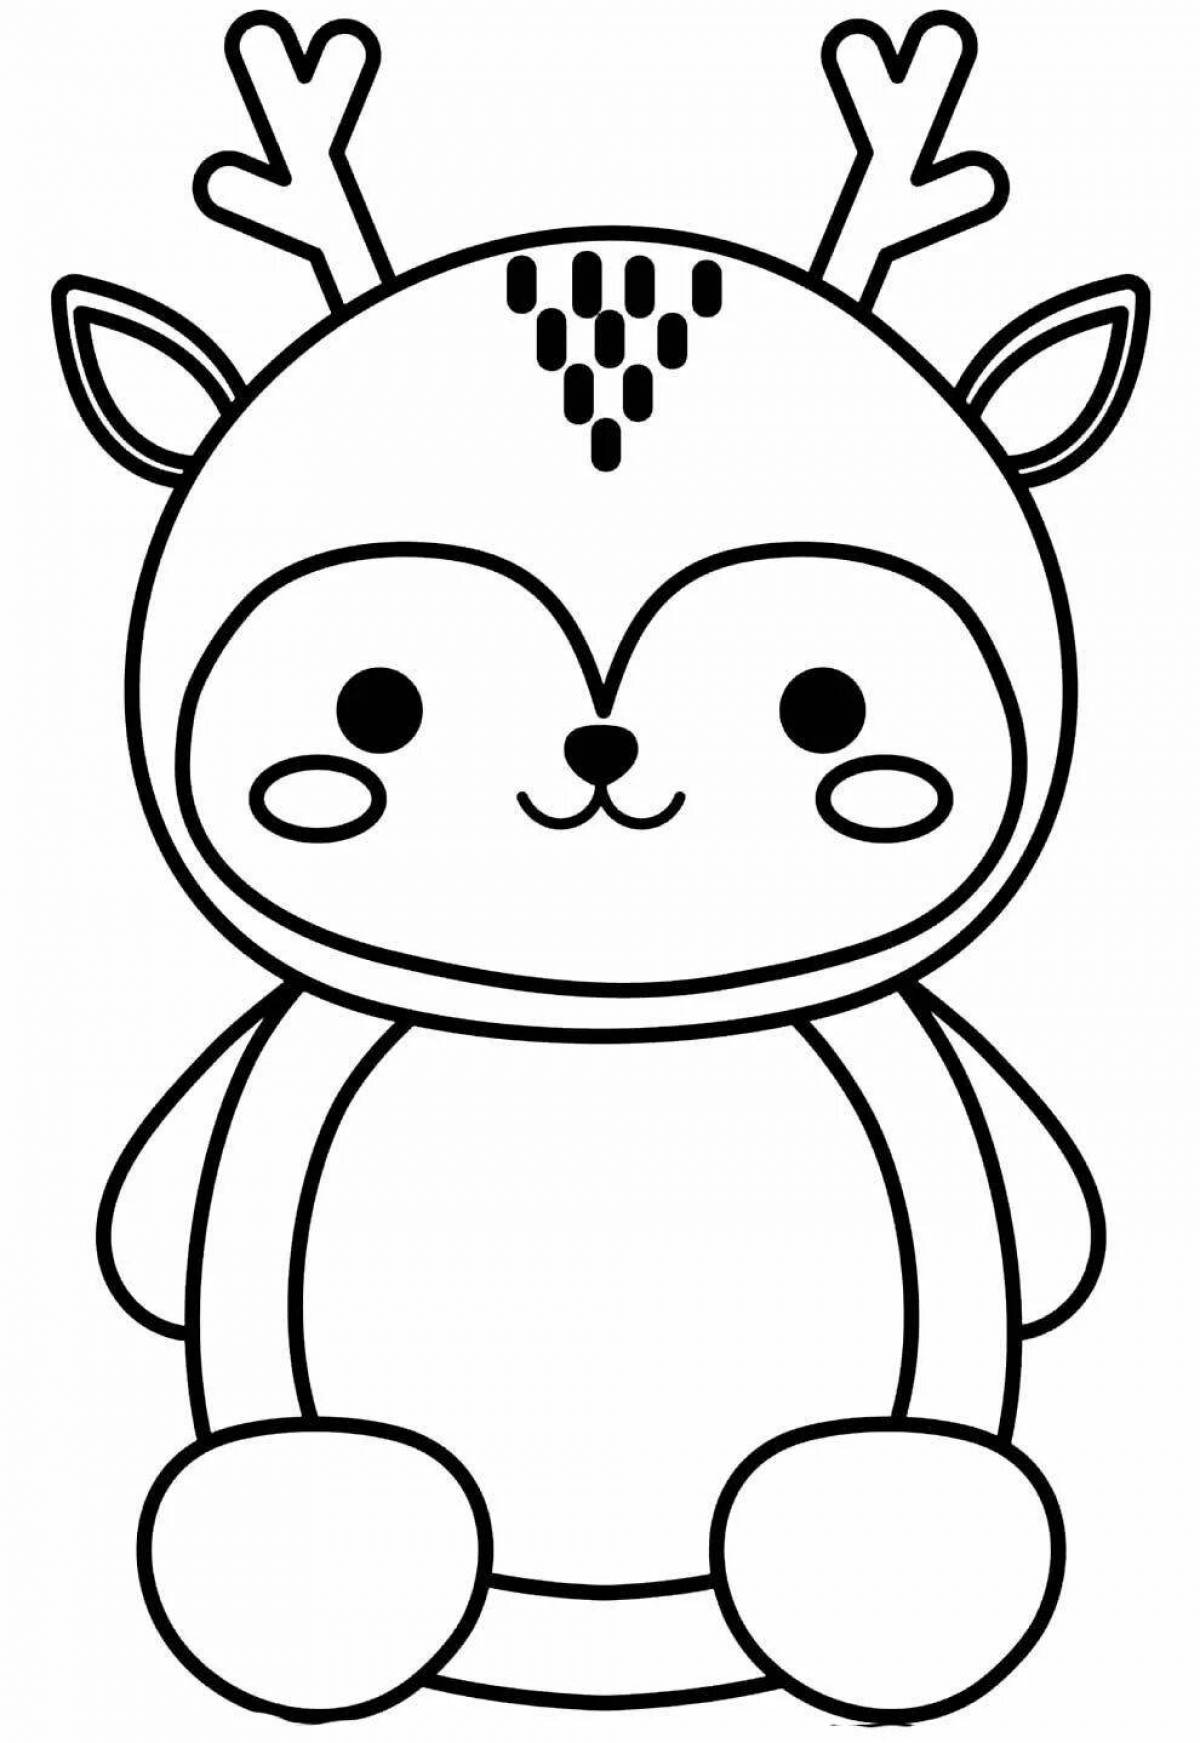 Happy squish coloring page